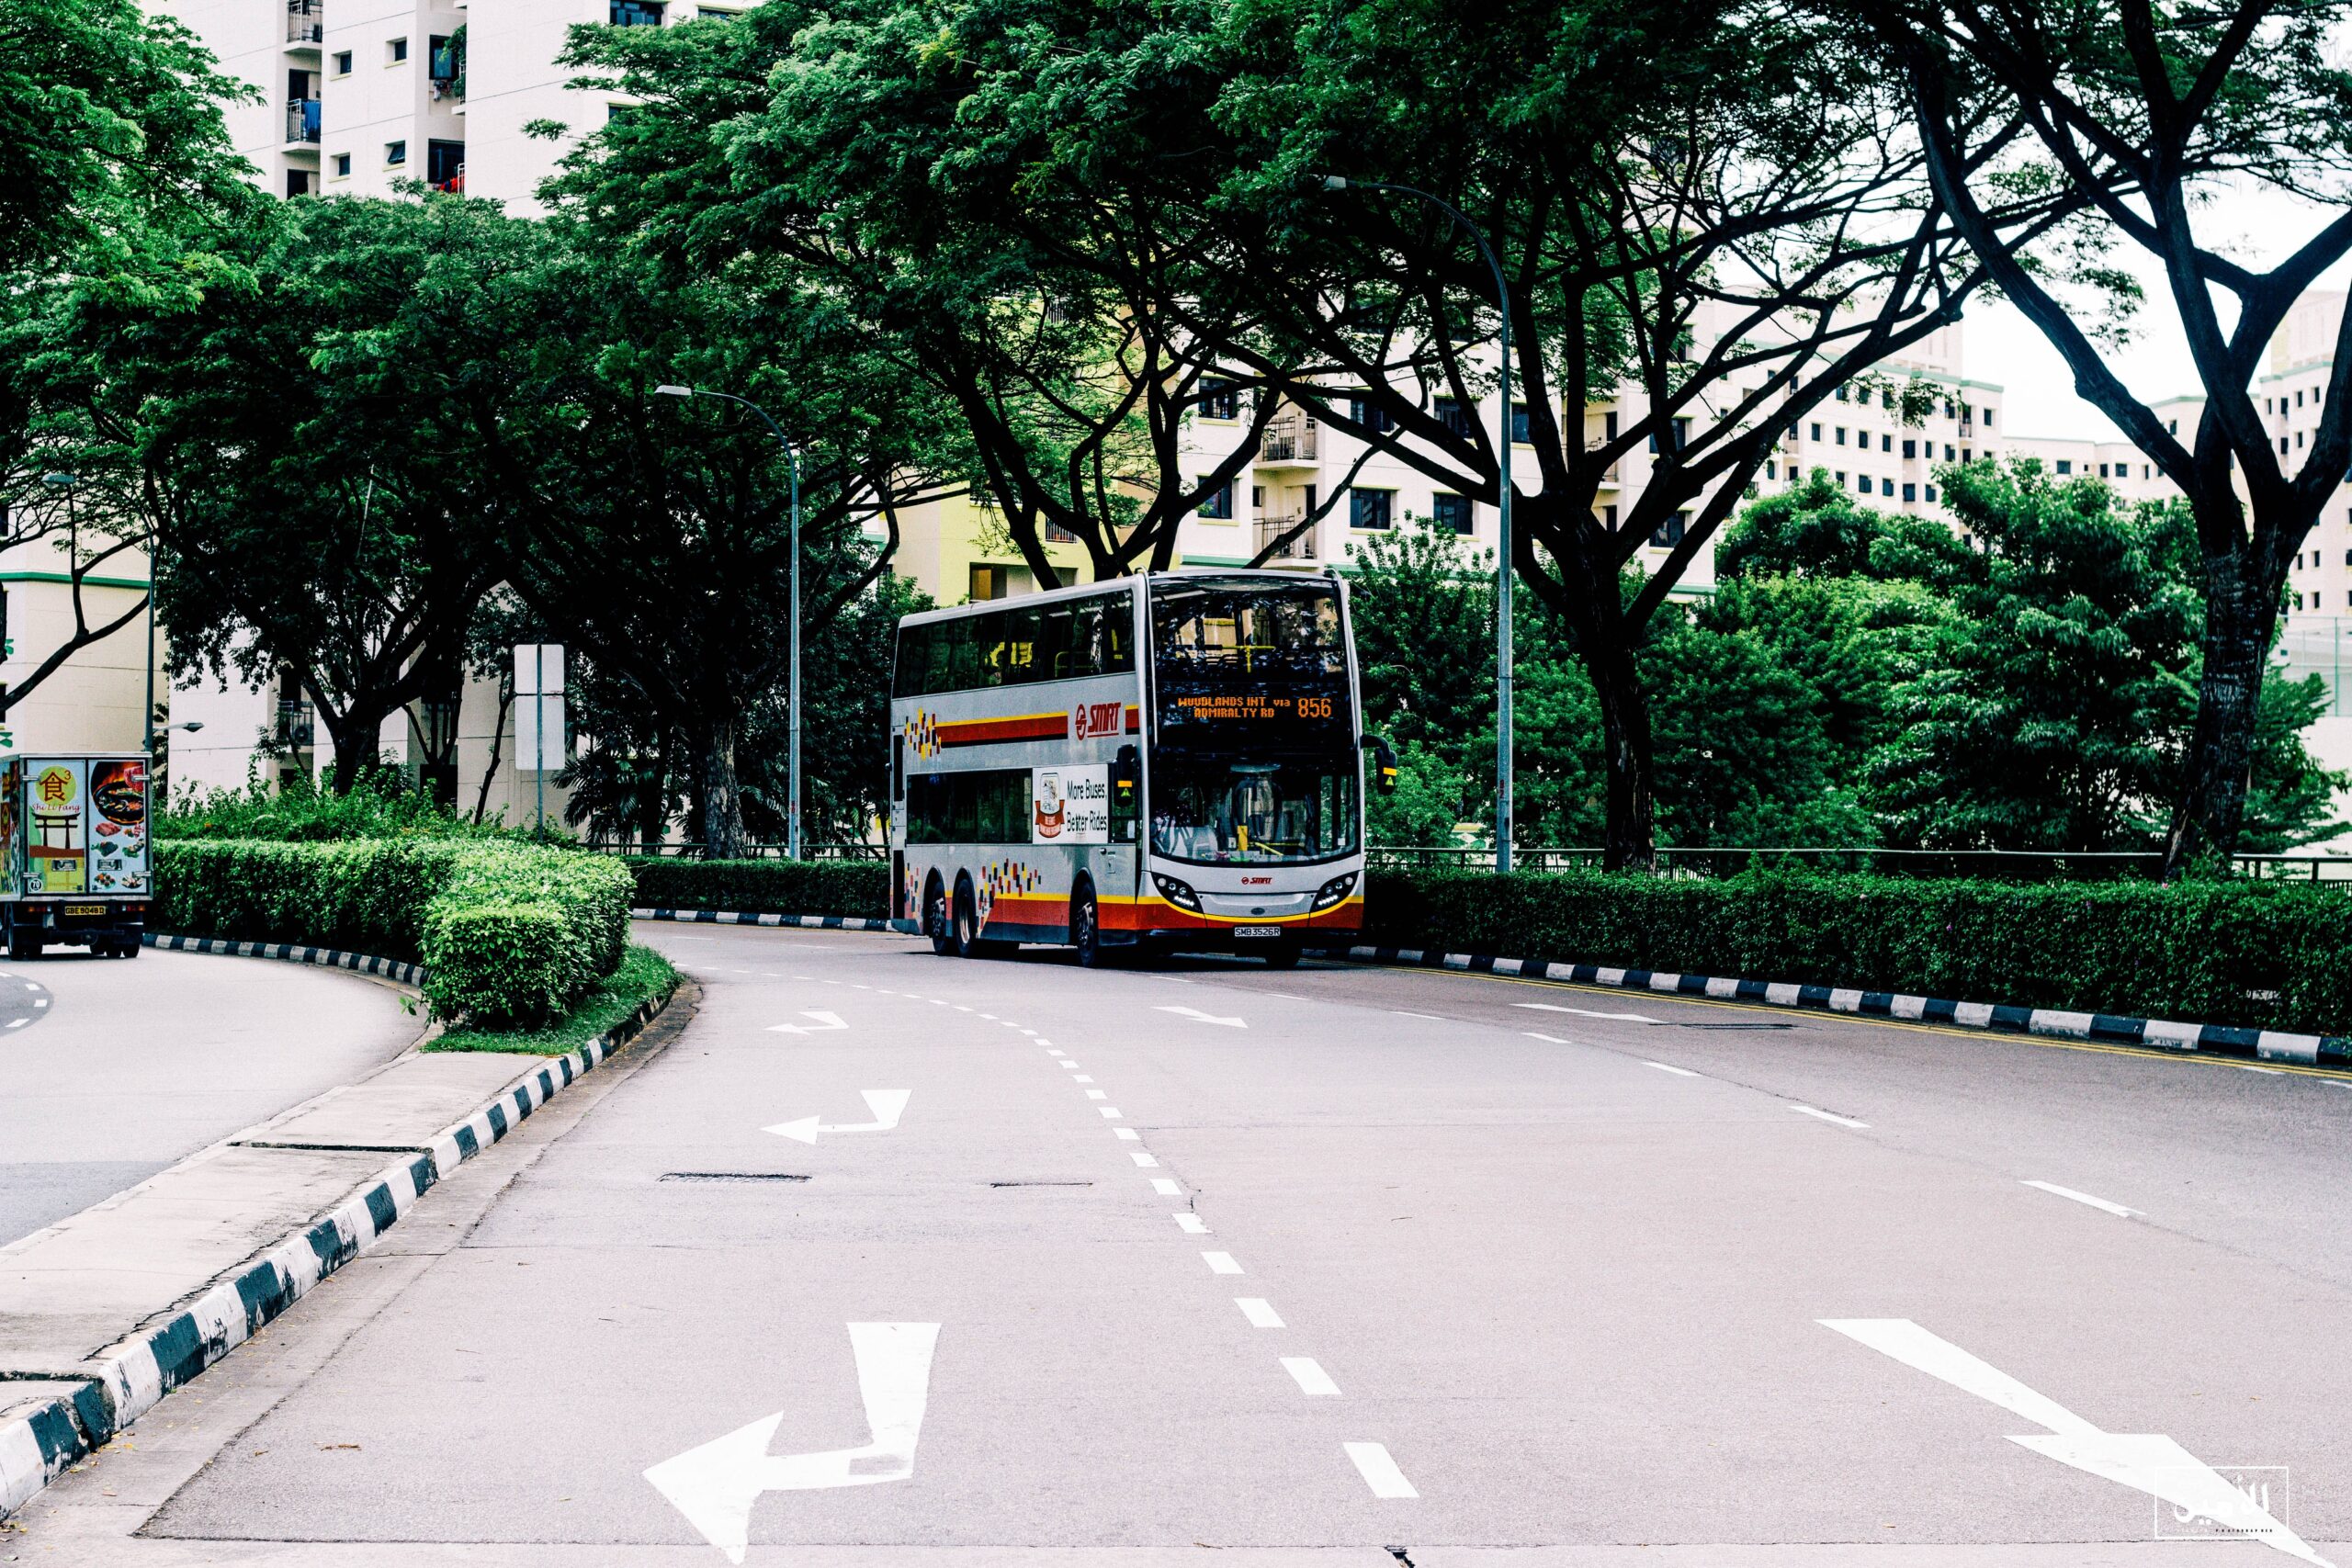 The introduction of bus lanes was an early means of encouraging a shift away from the car as the dominant mode of transport.  (Photo Credit: ALAMEEN A-DAE / Pexels)